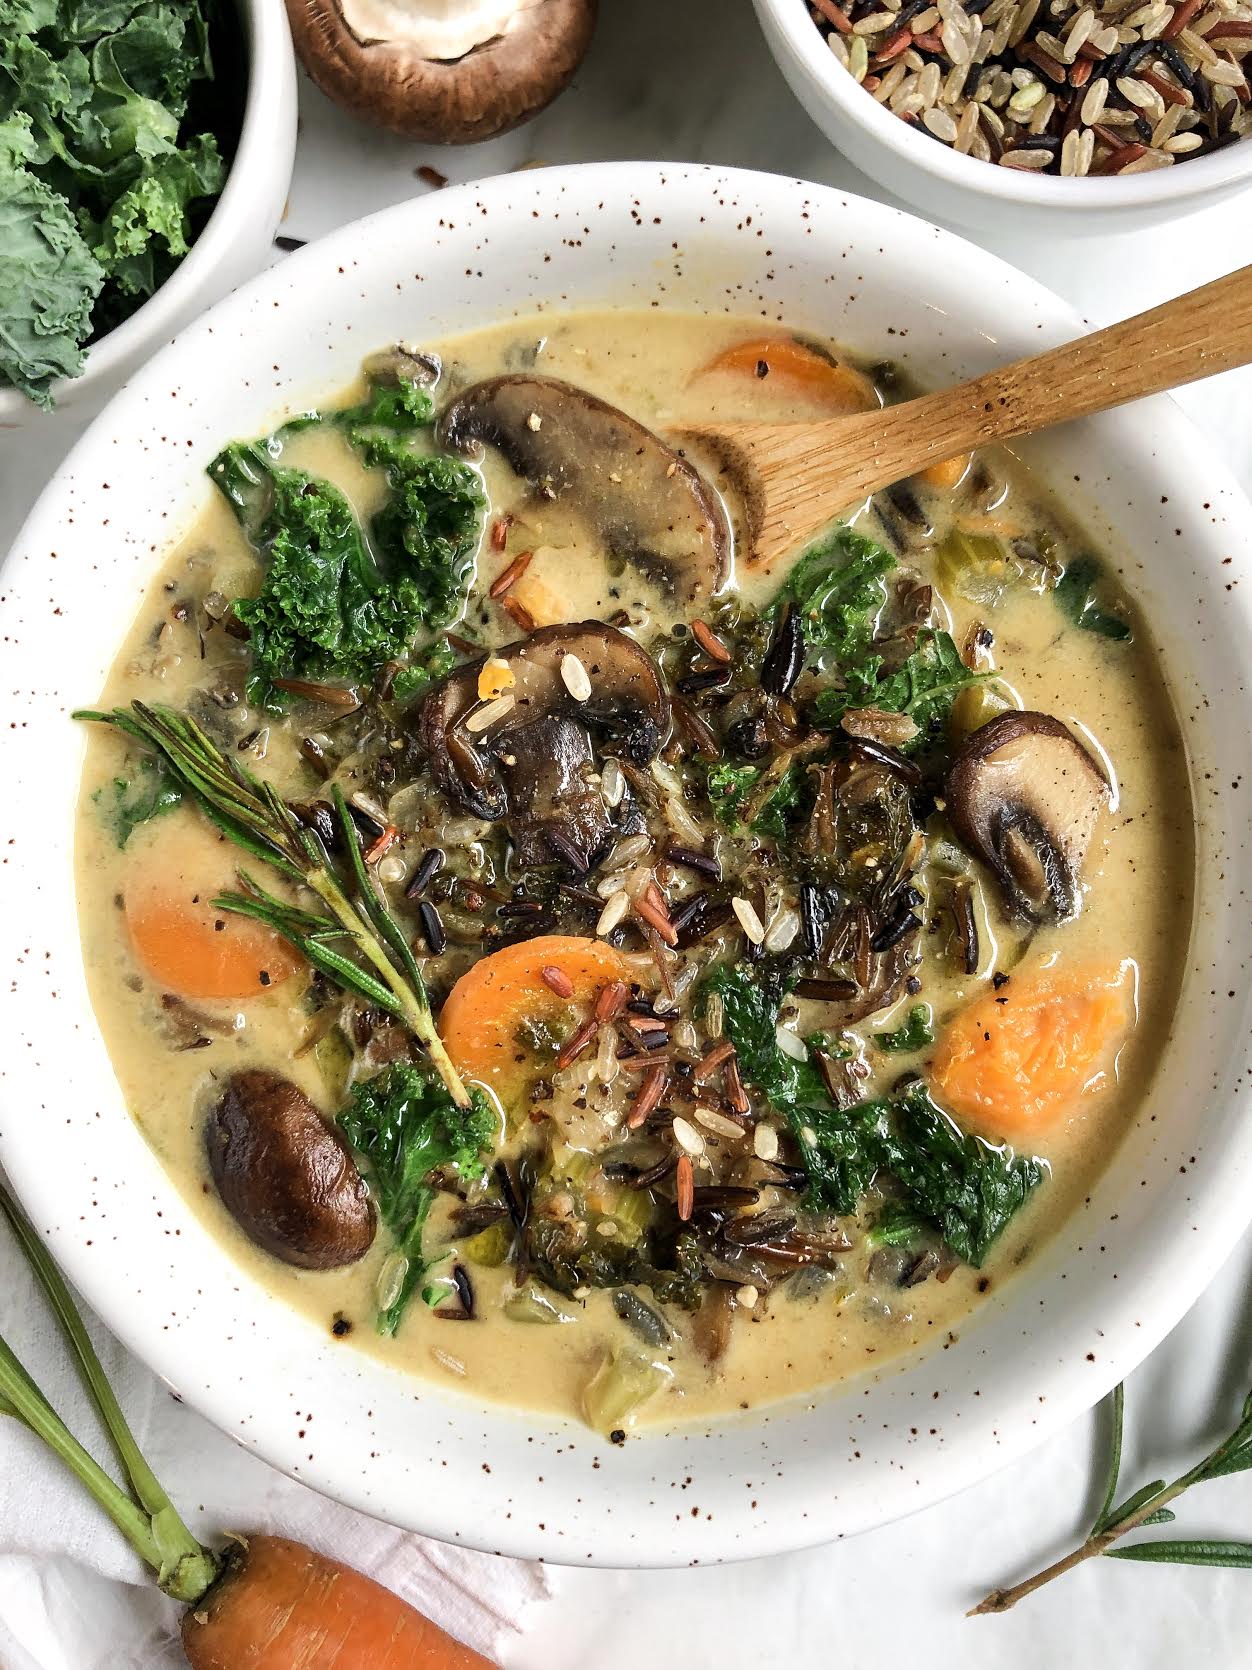 This Creamy Wild Rice Soup Is Fall's Coziest Dinner Recipe - Vital Proteins